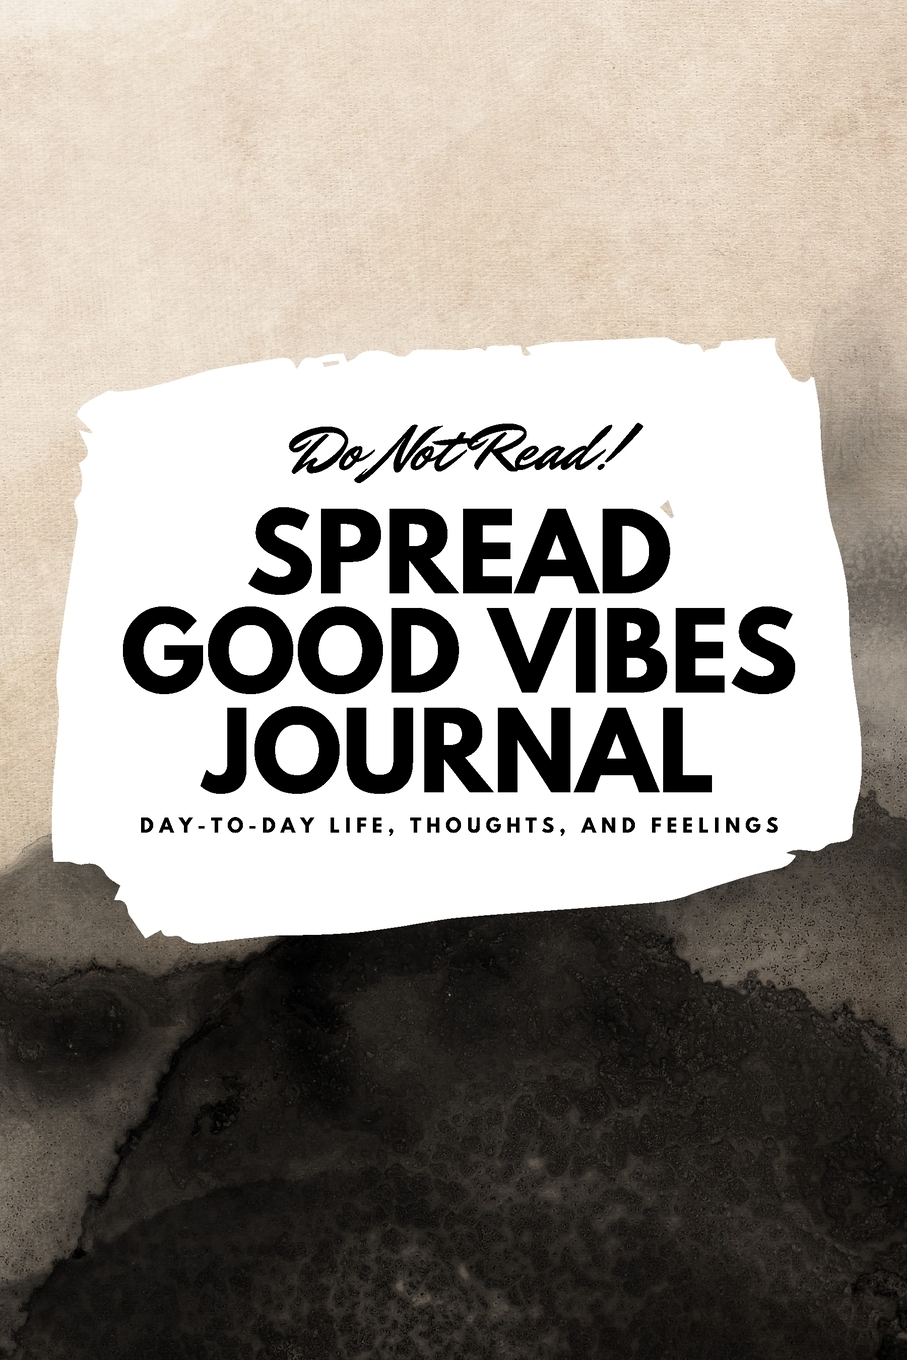 6x9 Blank Journal: Do Not Read! Spread Good Vibes Journal - Small Blank Journal - 6x9 Blank Journal (Softcover Journal / Notebook / Sketchbook / Diary) (Series #30) (Paperback) - image 1 of 1